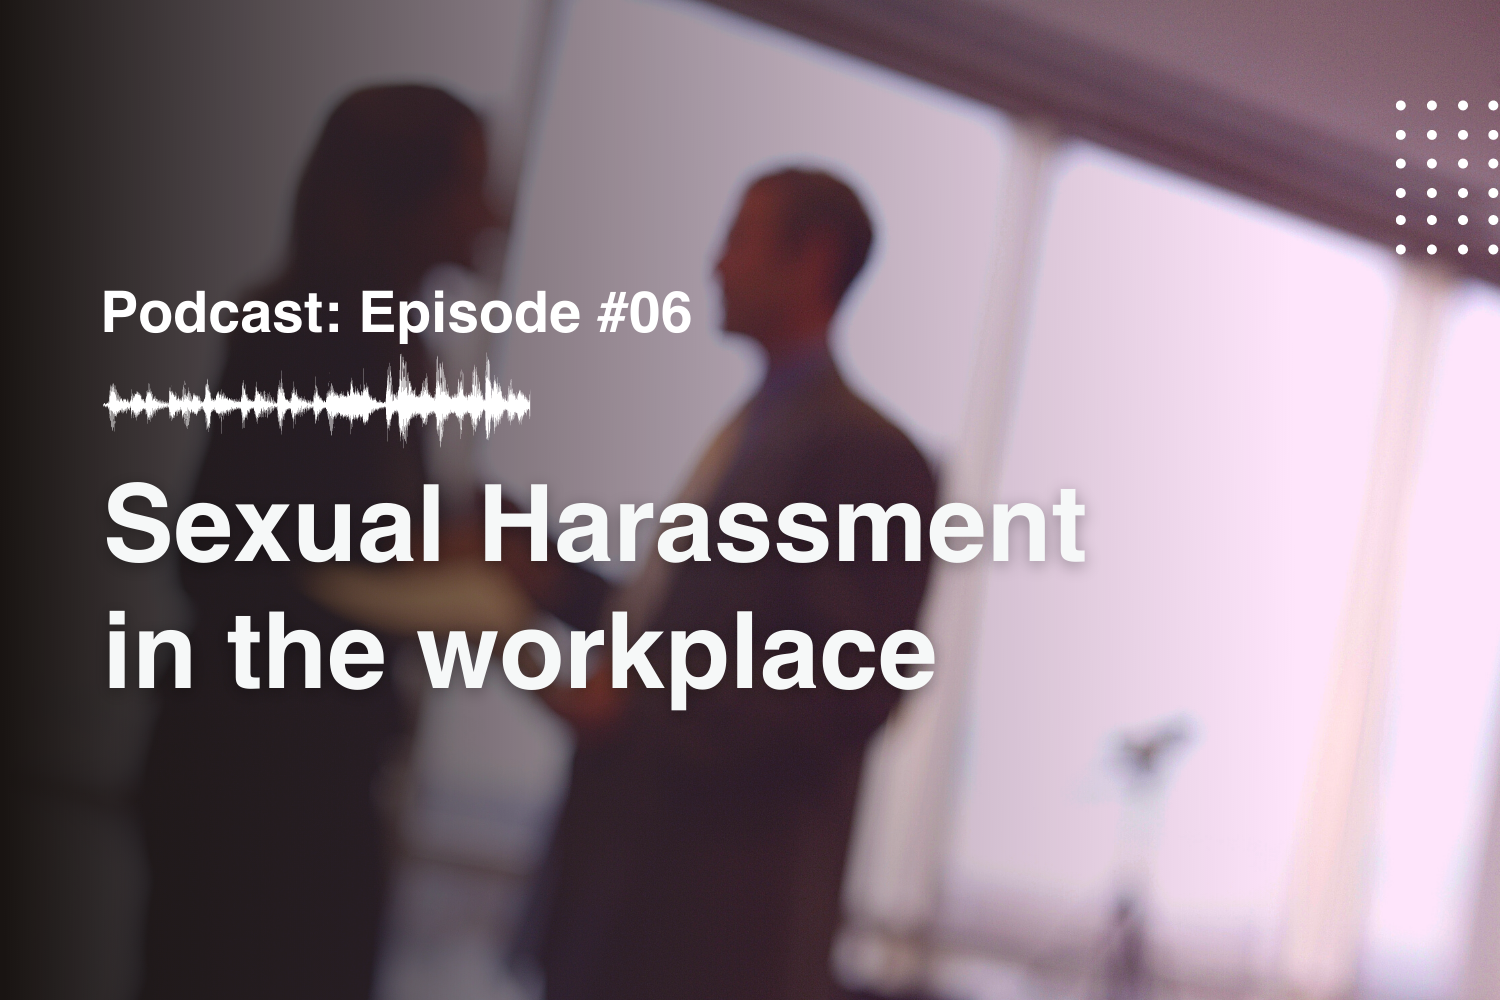 Episode #6 Sexual Harassment in the workplace